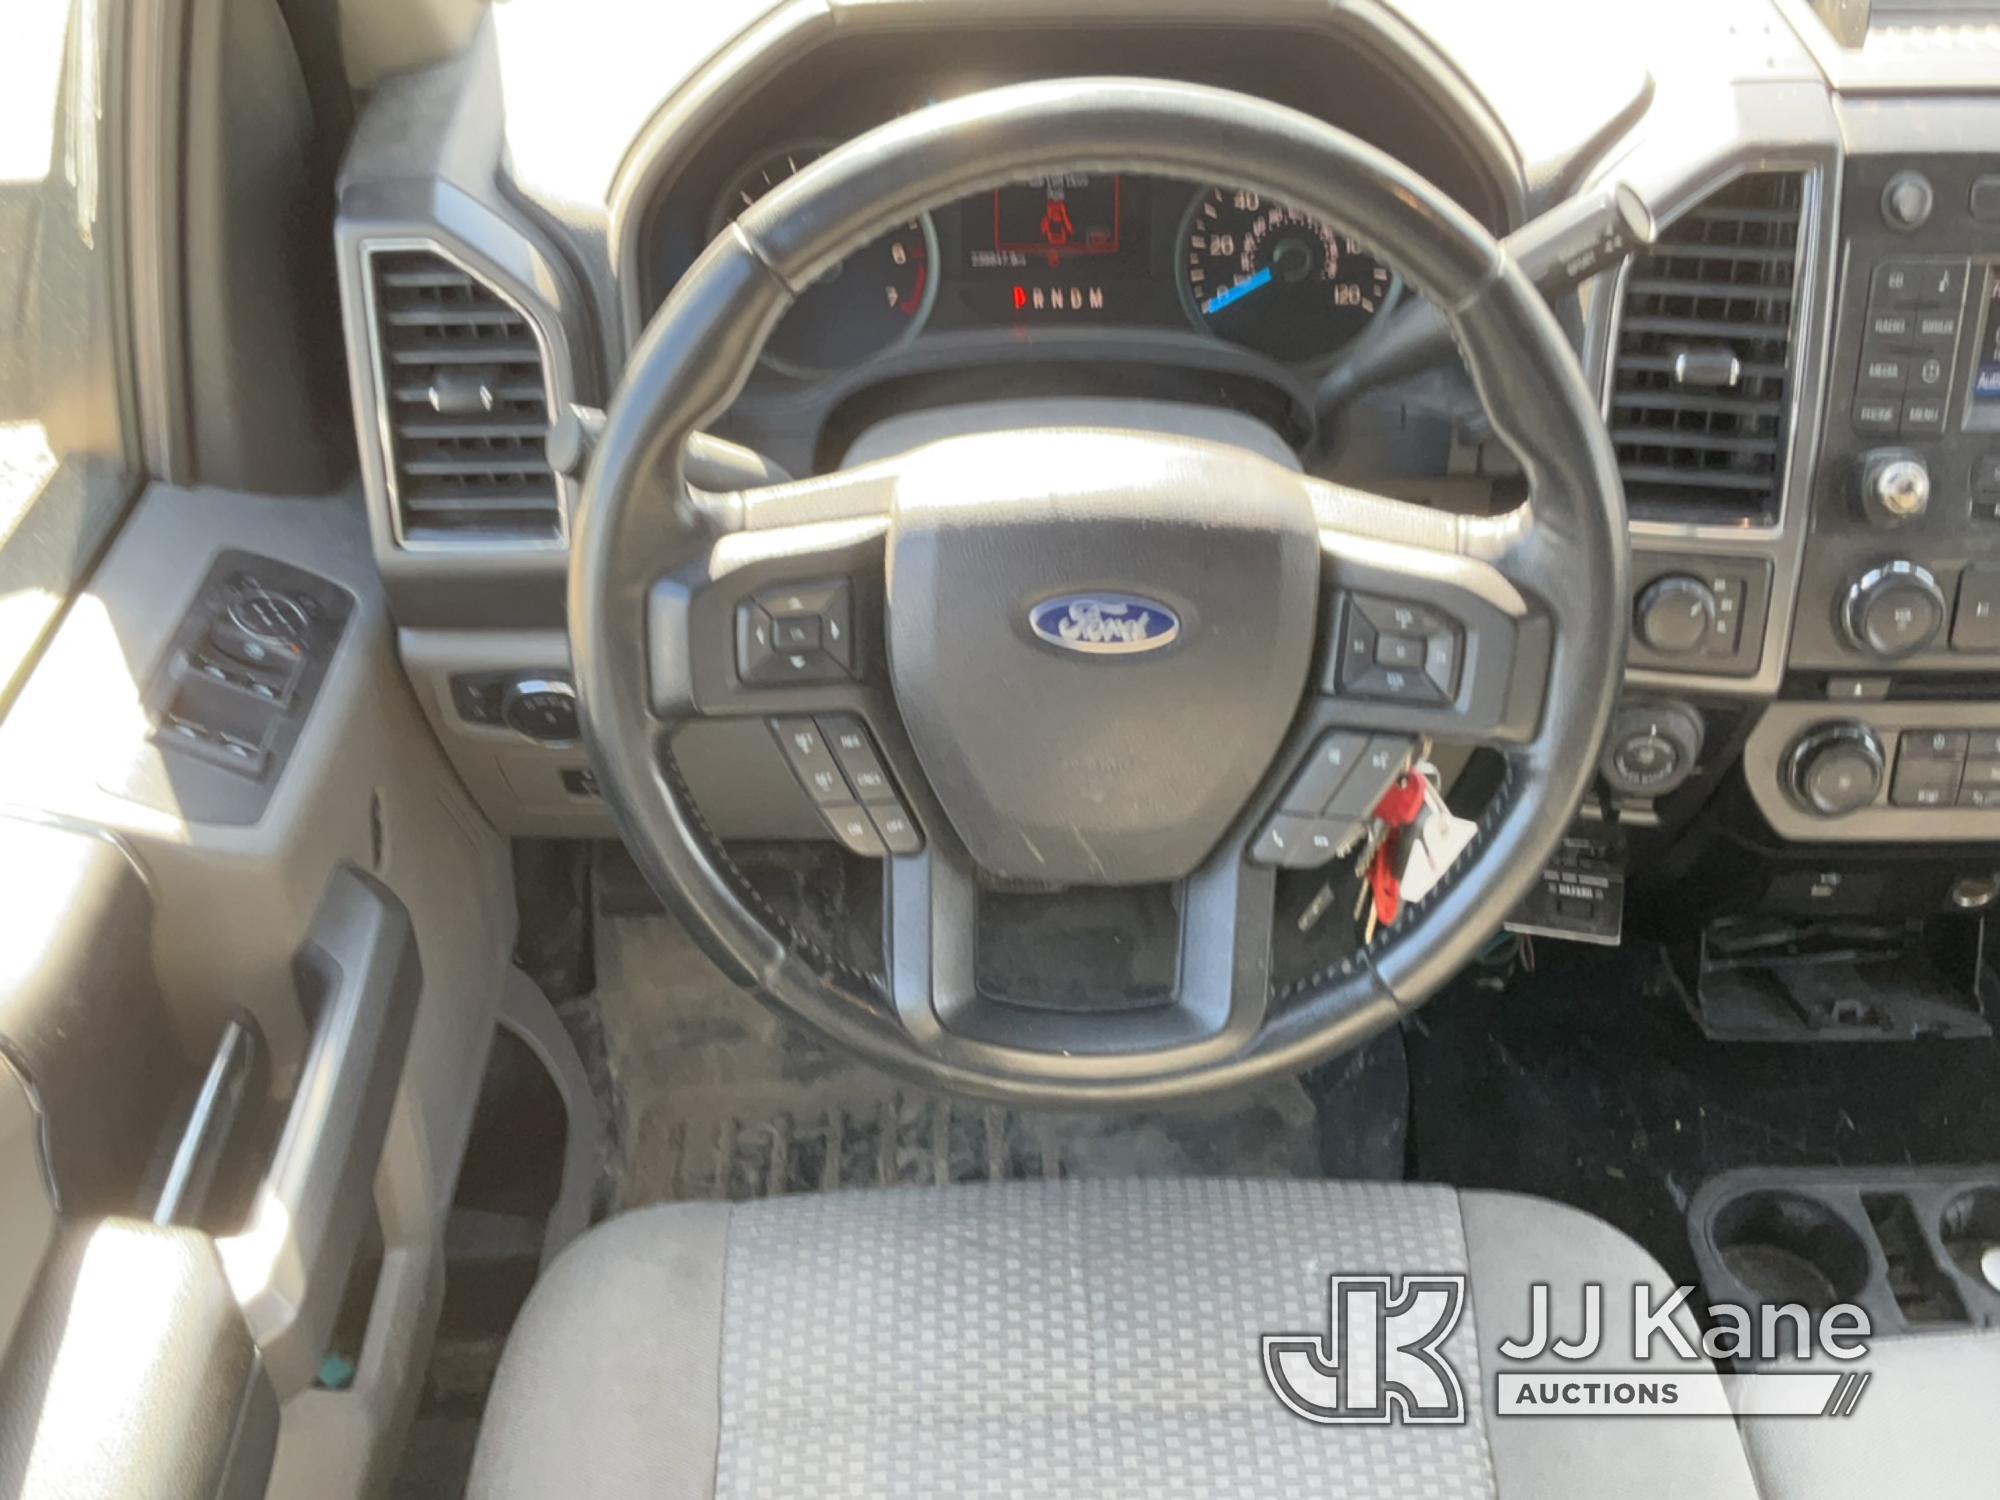 (South Beloit, IL) 2017 Ford F150 4x4 Crew-Cab Pickup Truck Runs, Moves, Check Engine Light On, Body